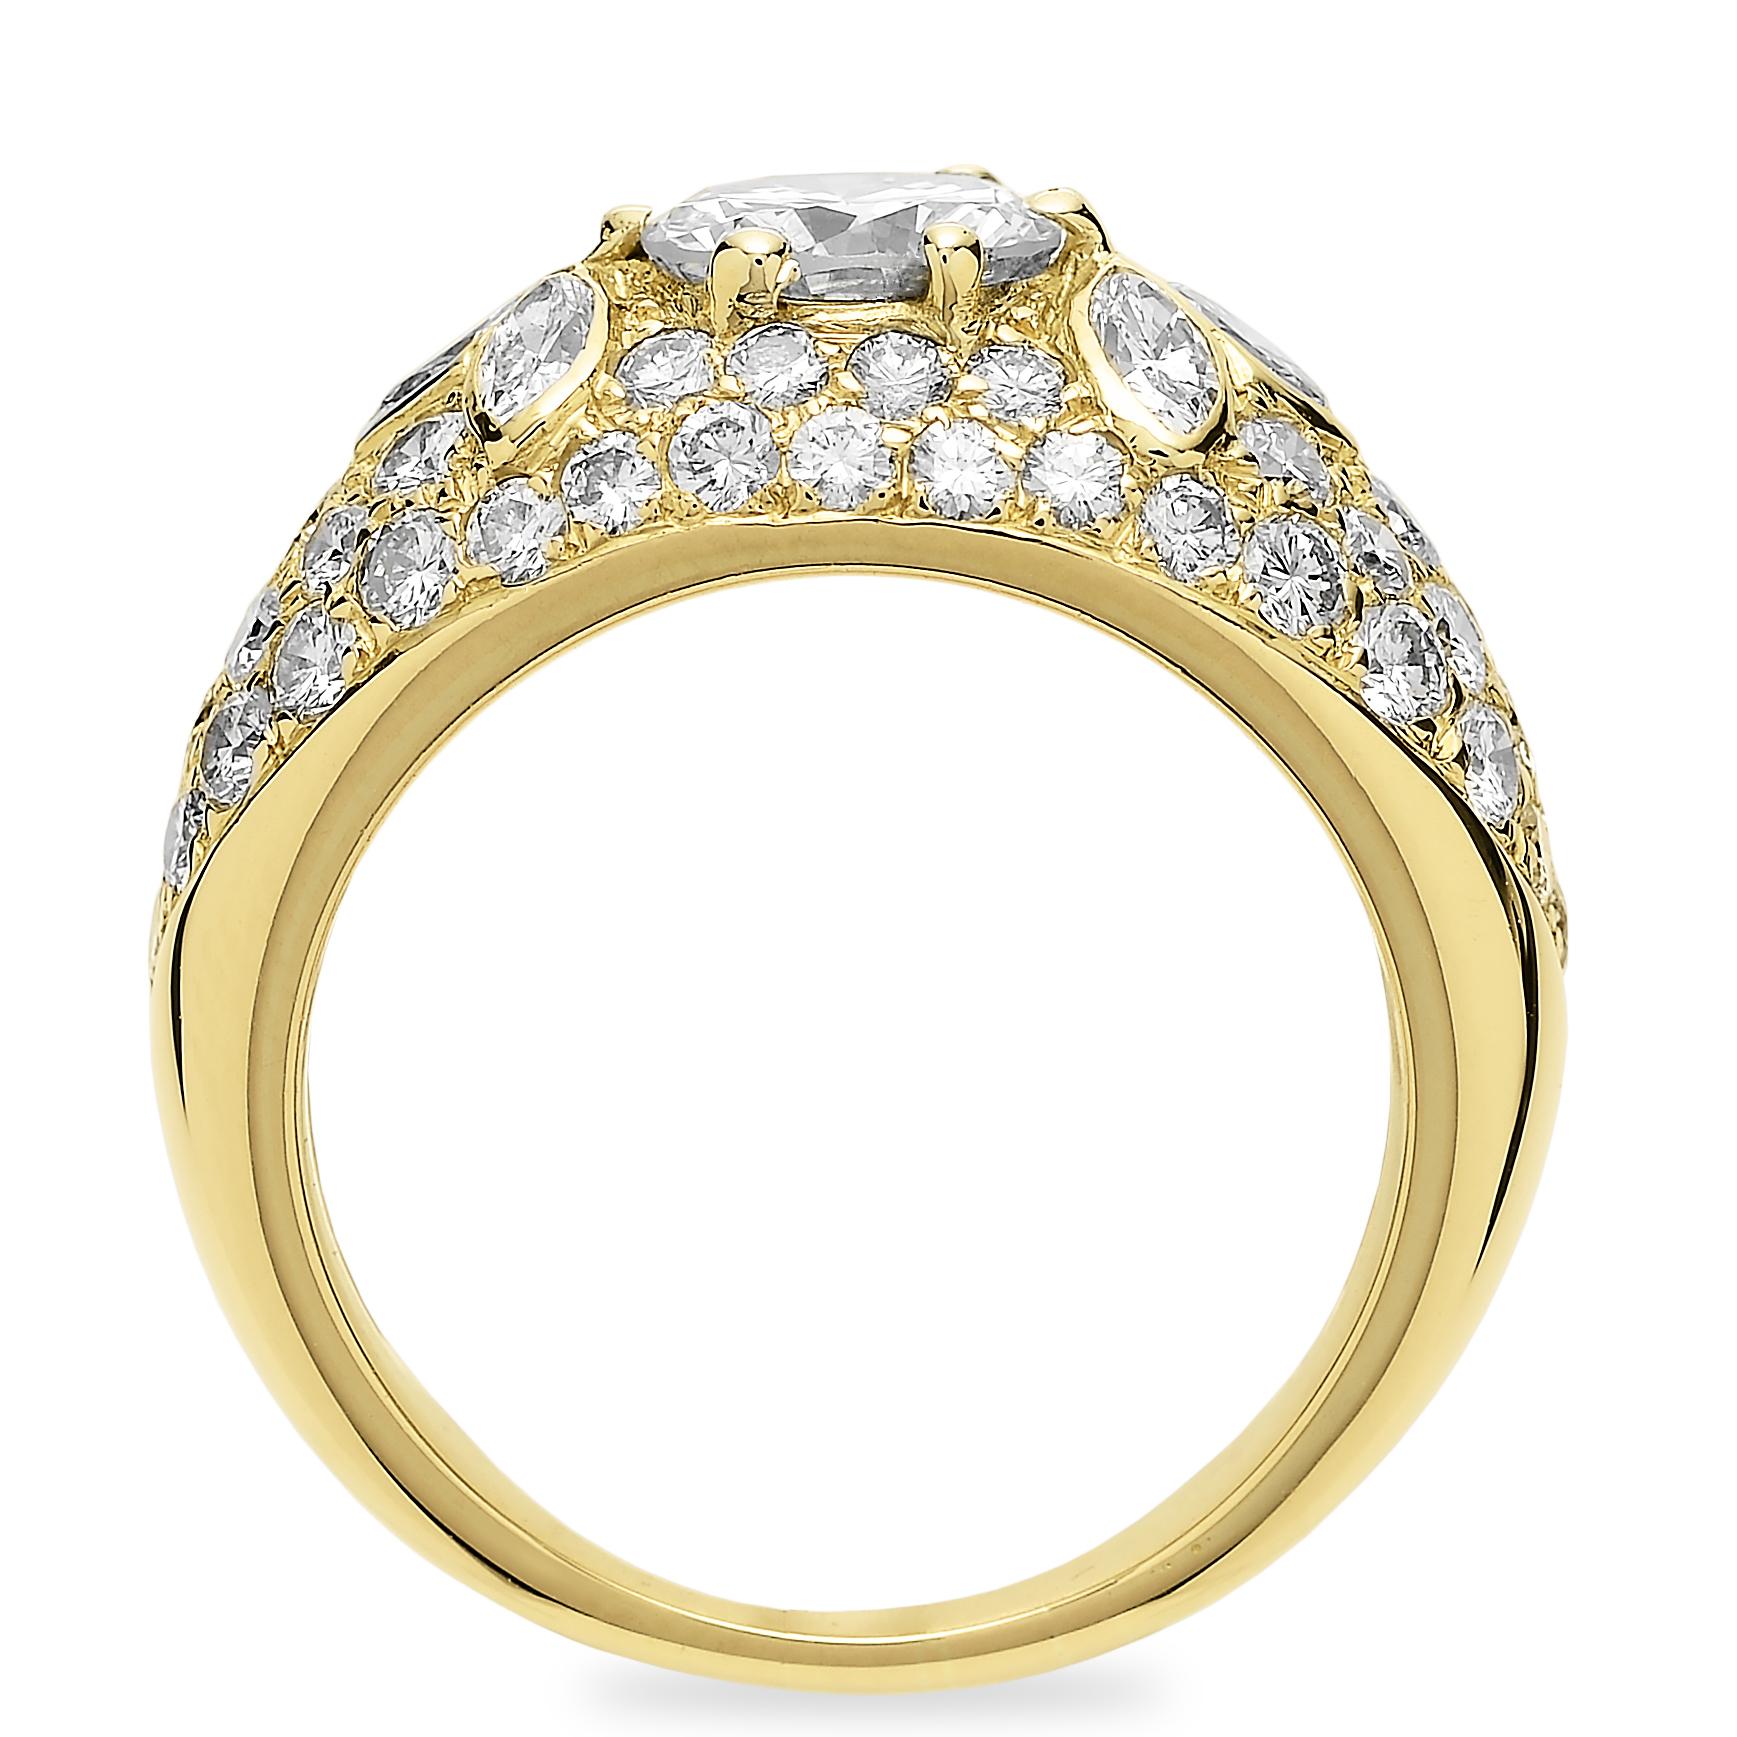 Zertifizierter Diamant  Bombay Cluster Dome 3,66ct Ring in dickem 18ct Gelbgold  5